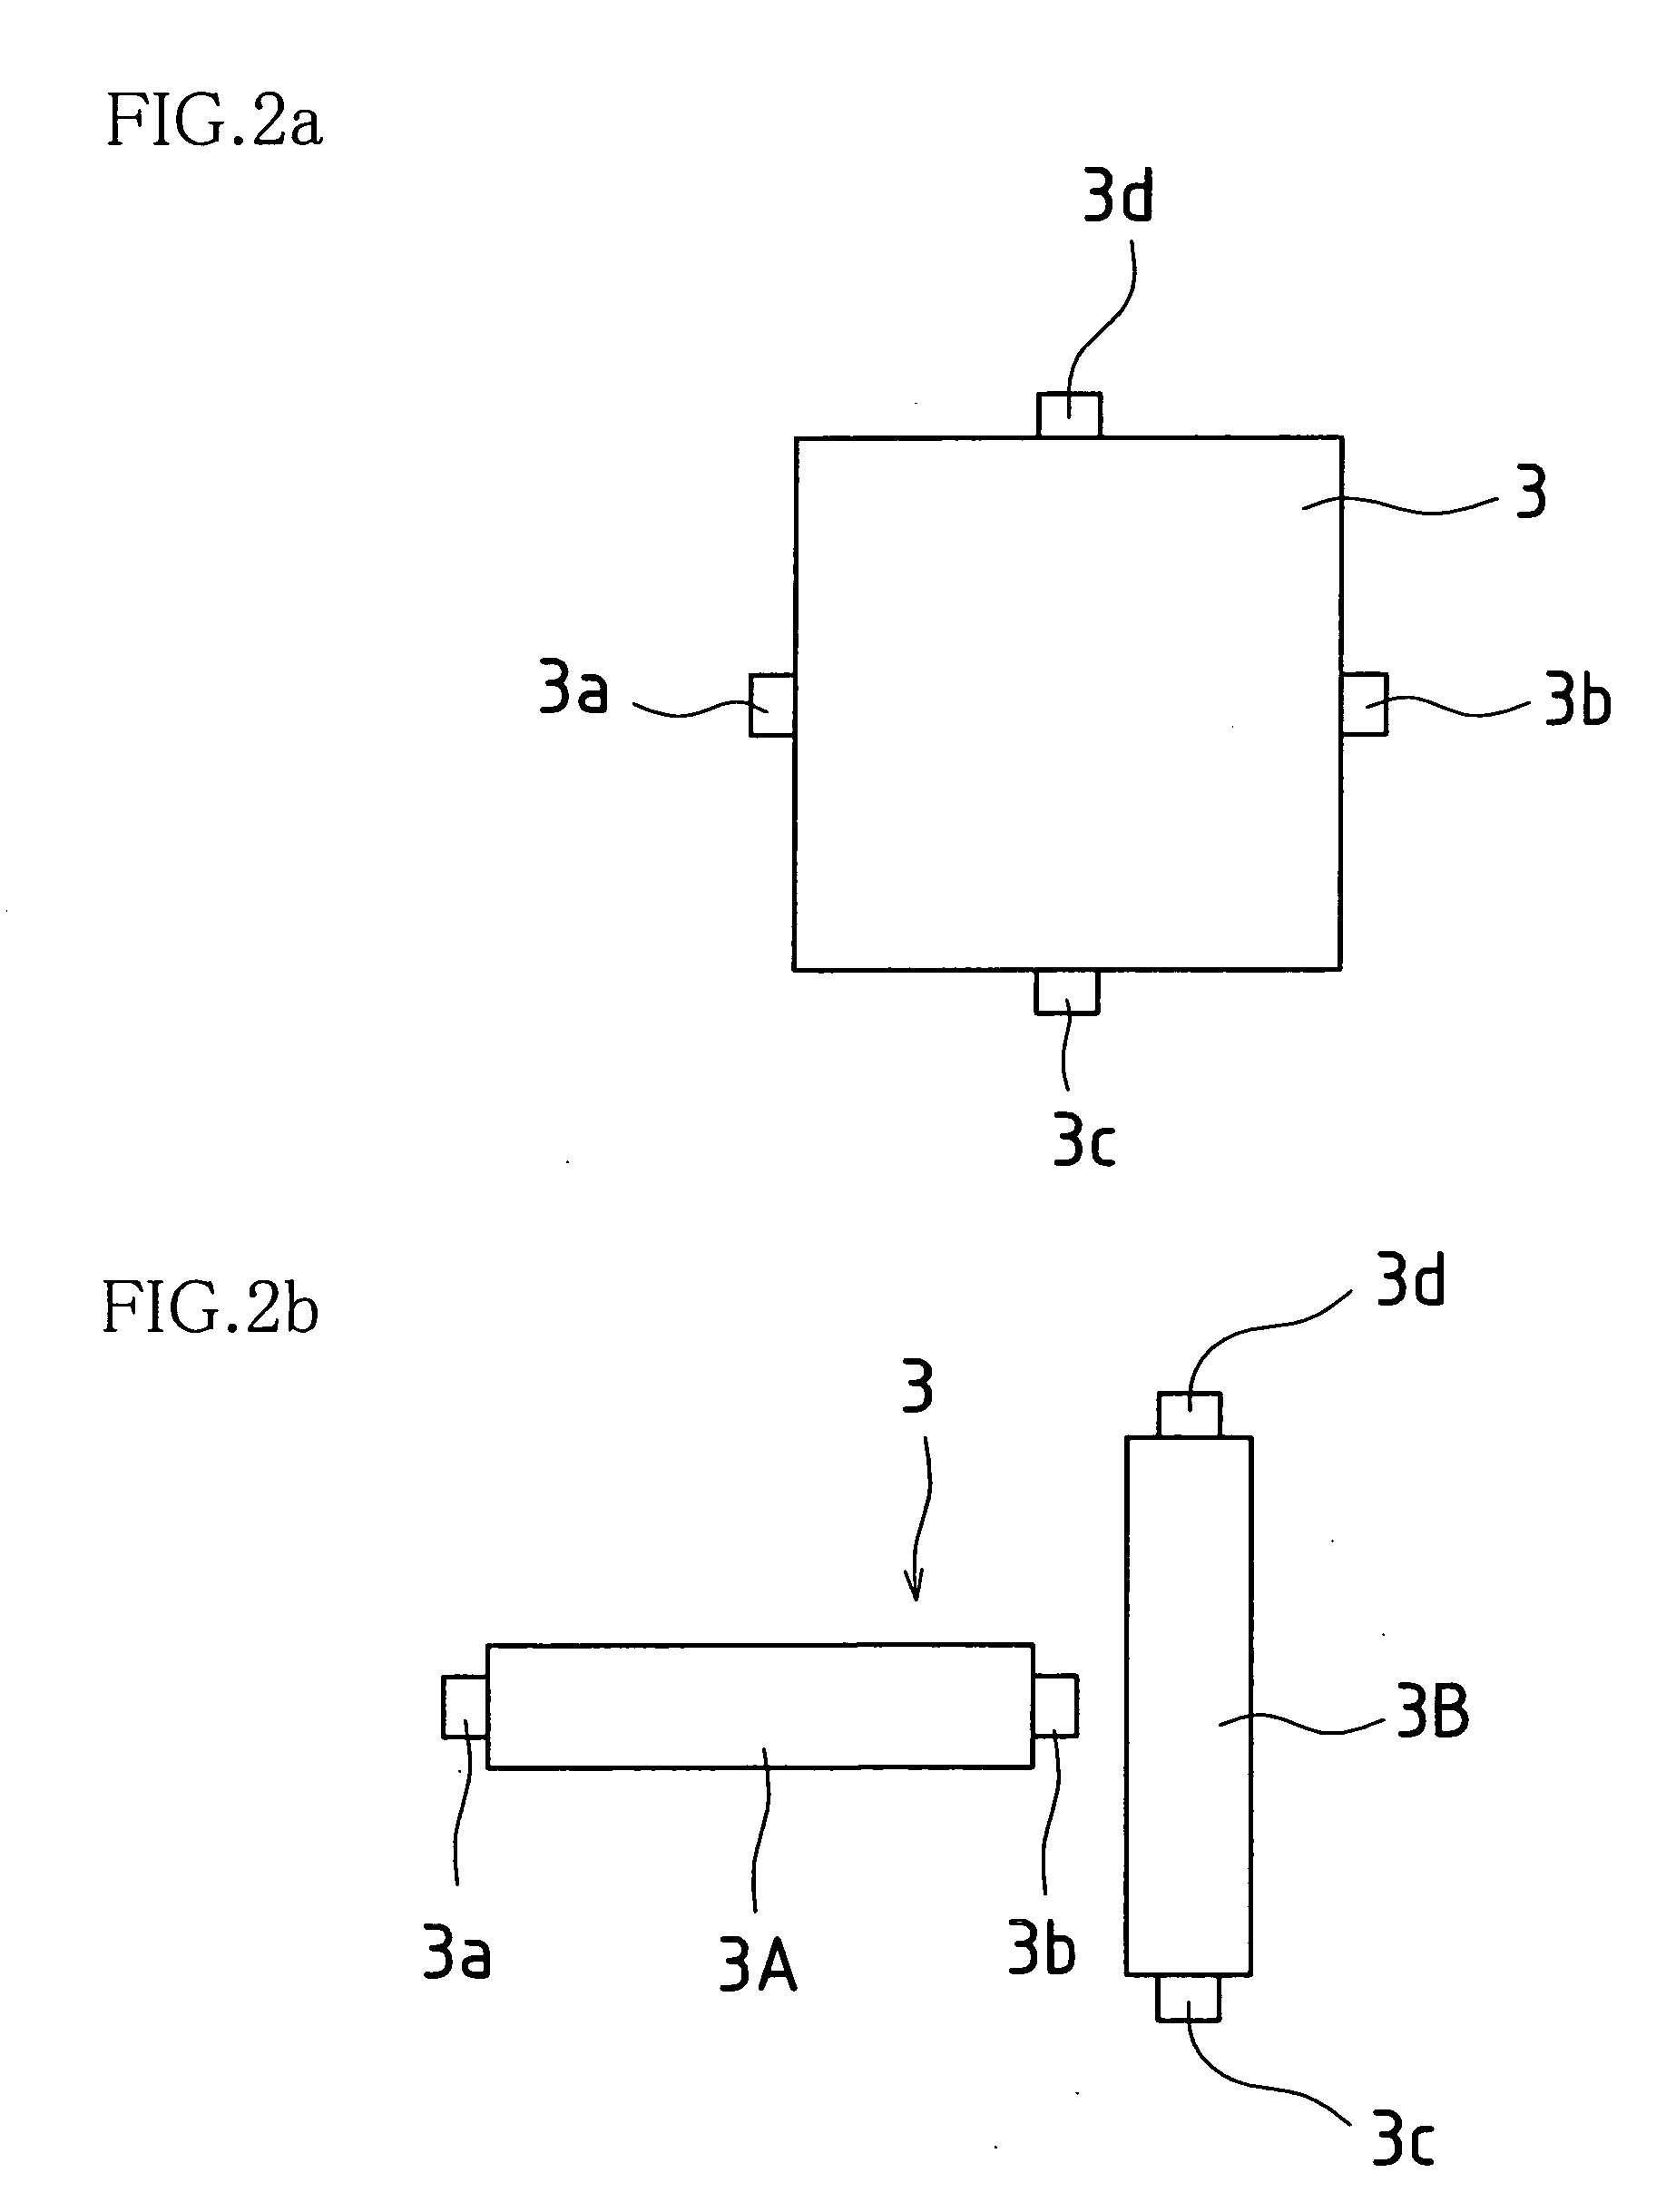 Remote control device, electronic device, display device, and game machine control device